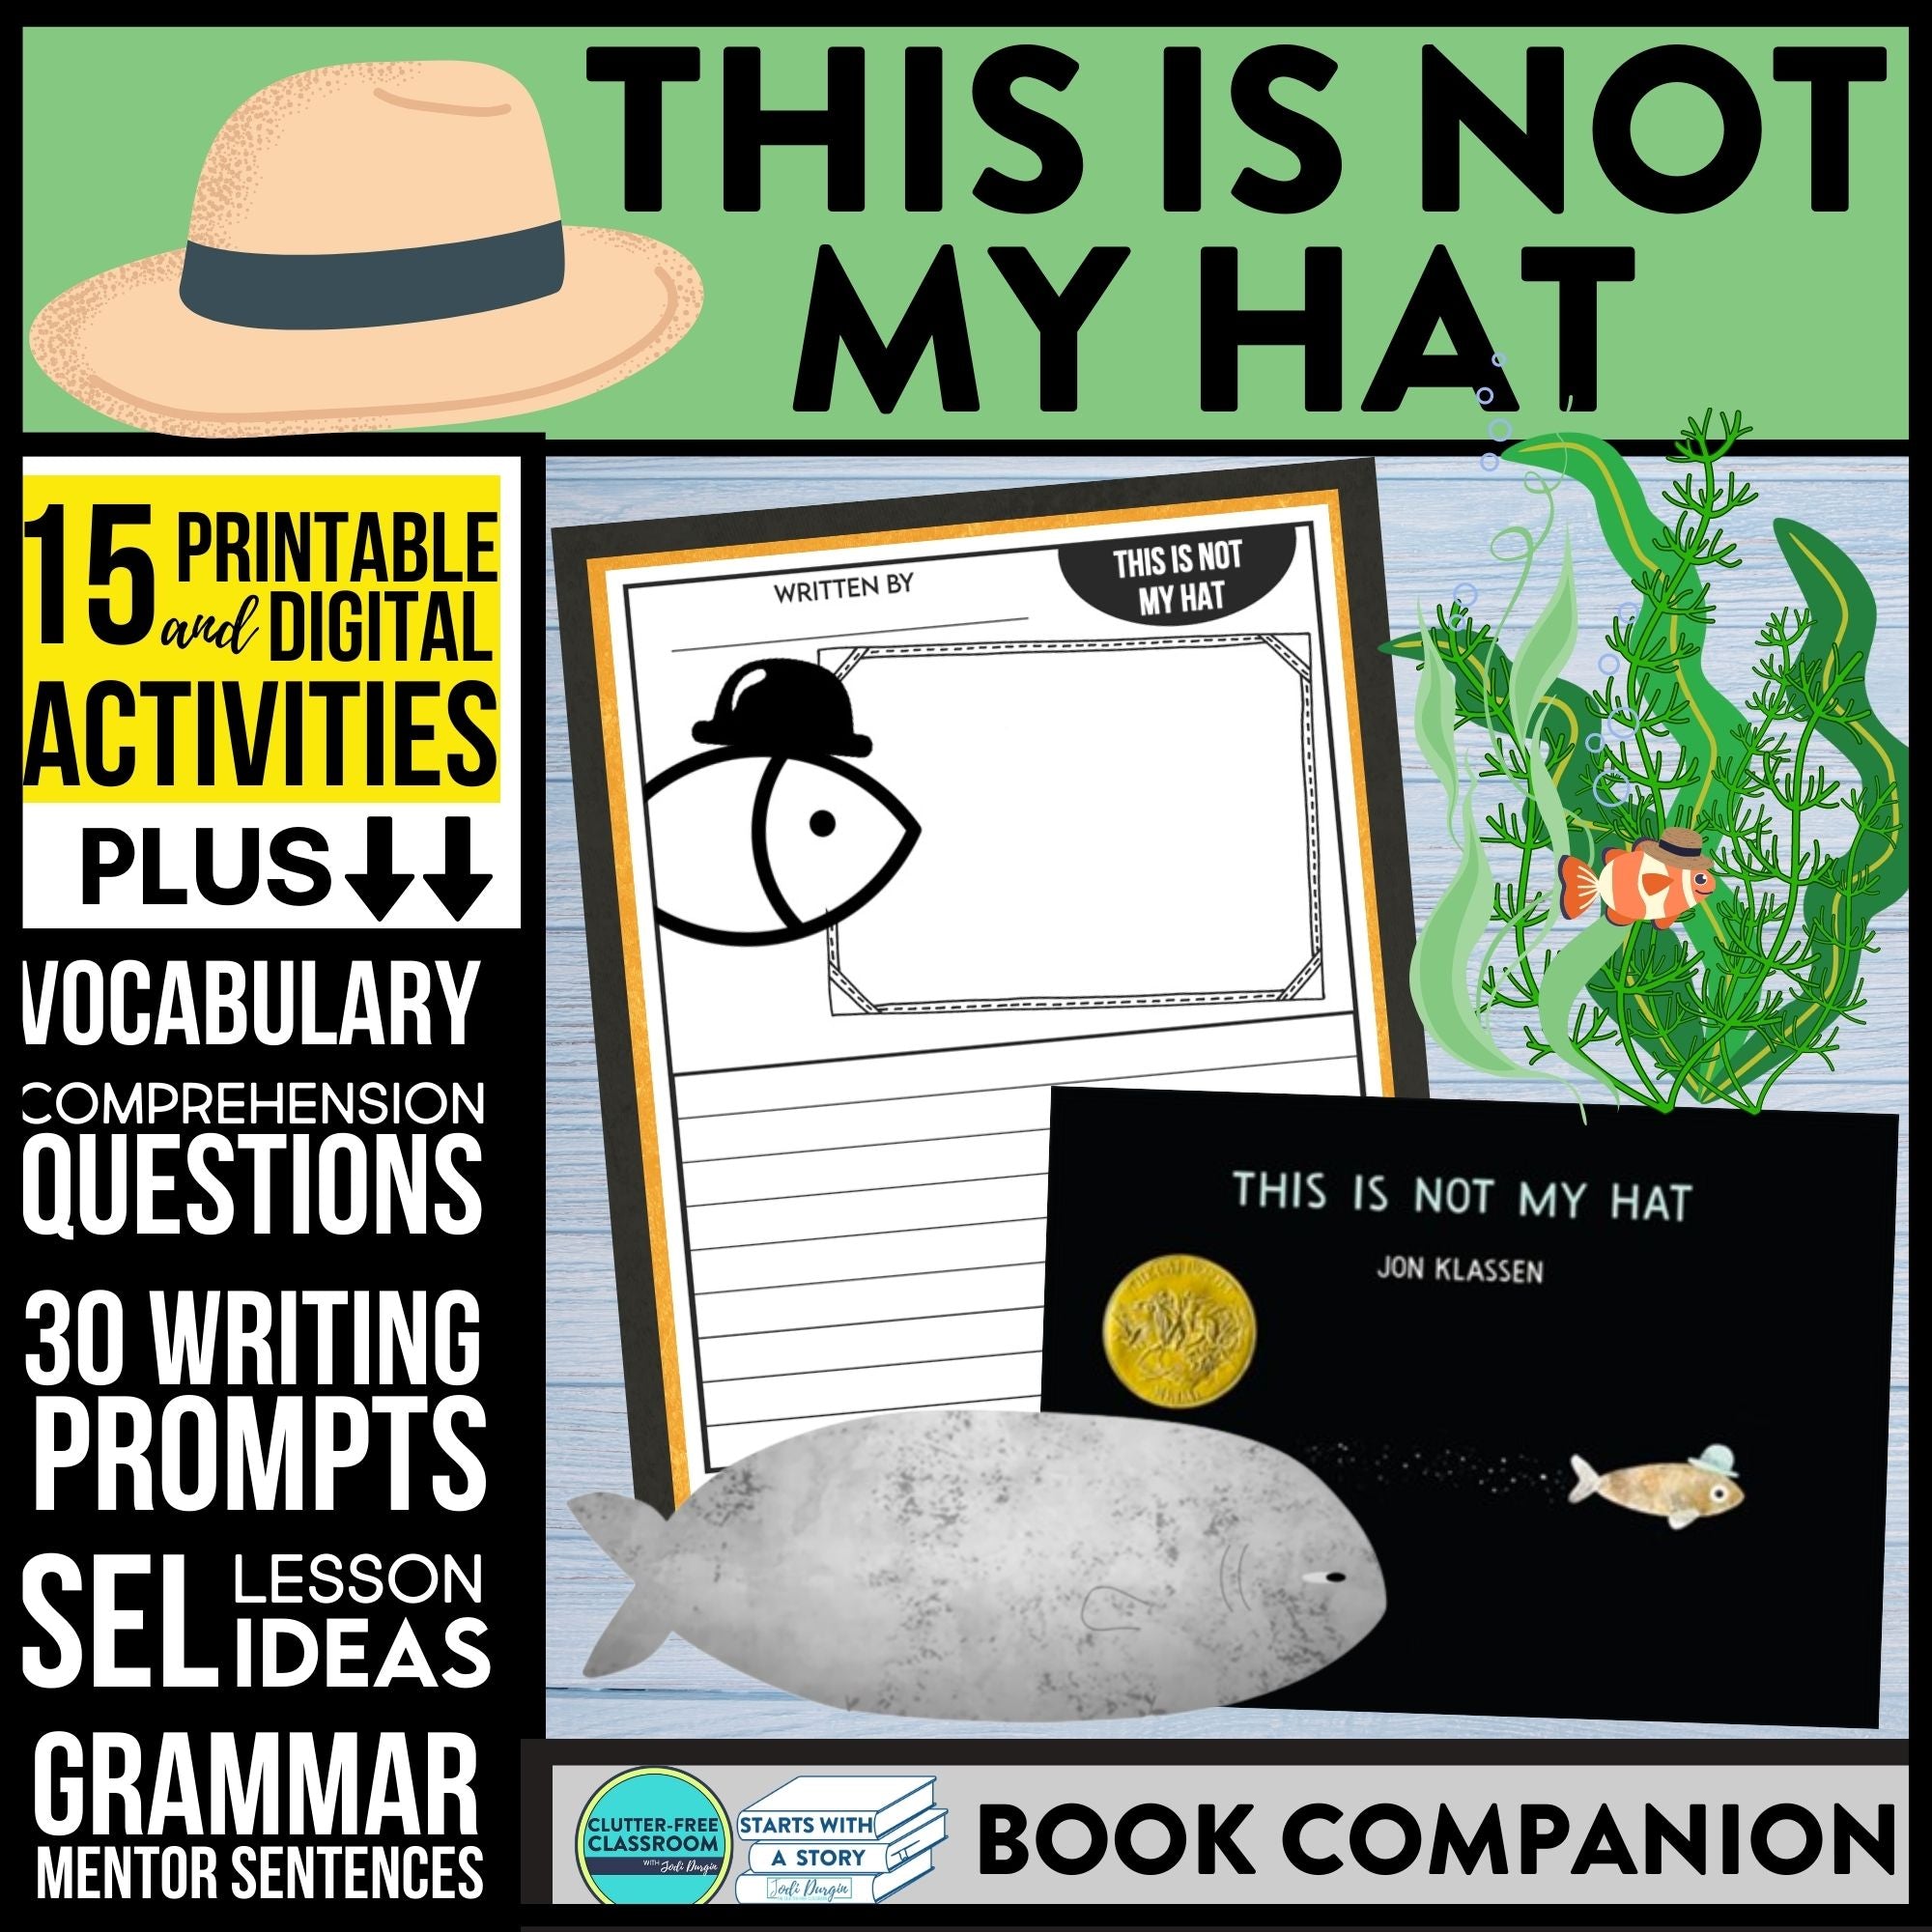 THIS IS NOT MY HAT activities and lesson plan ideas